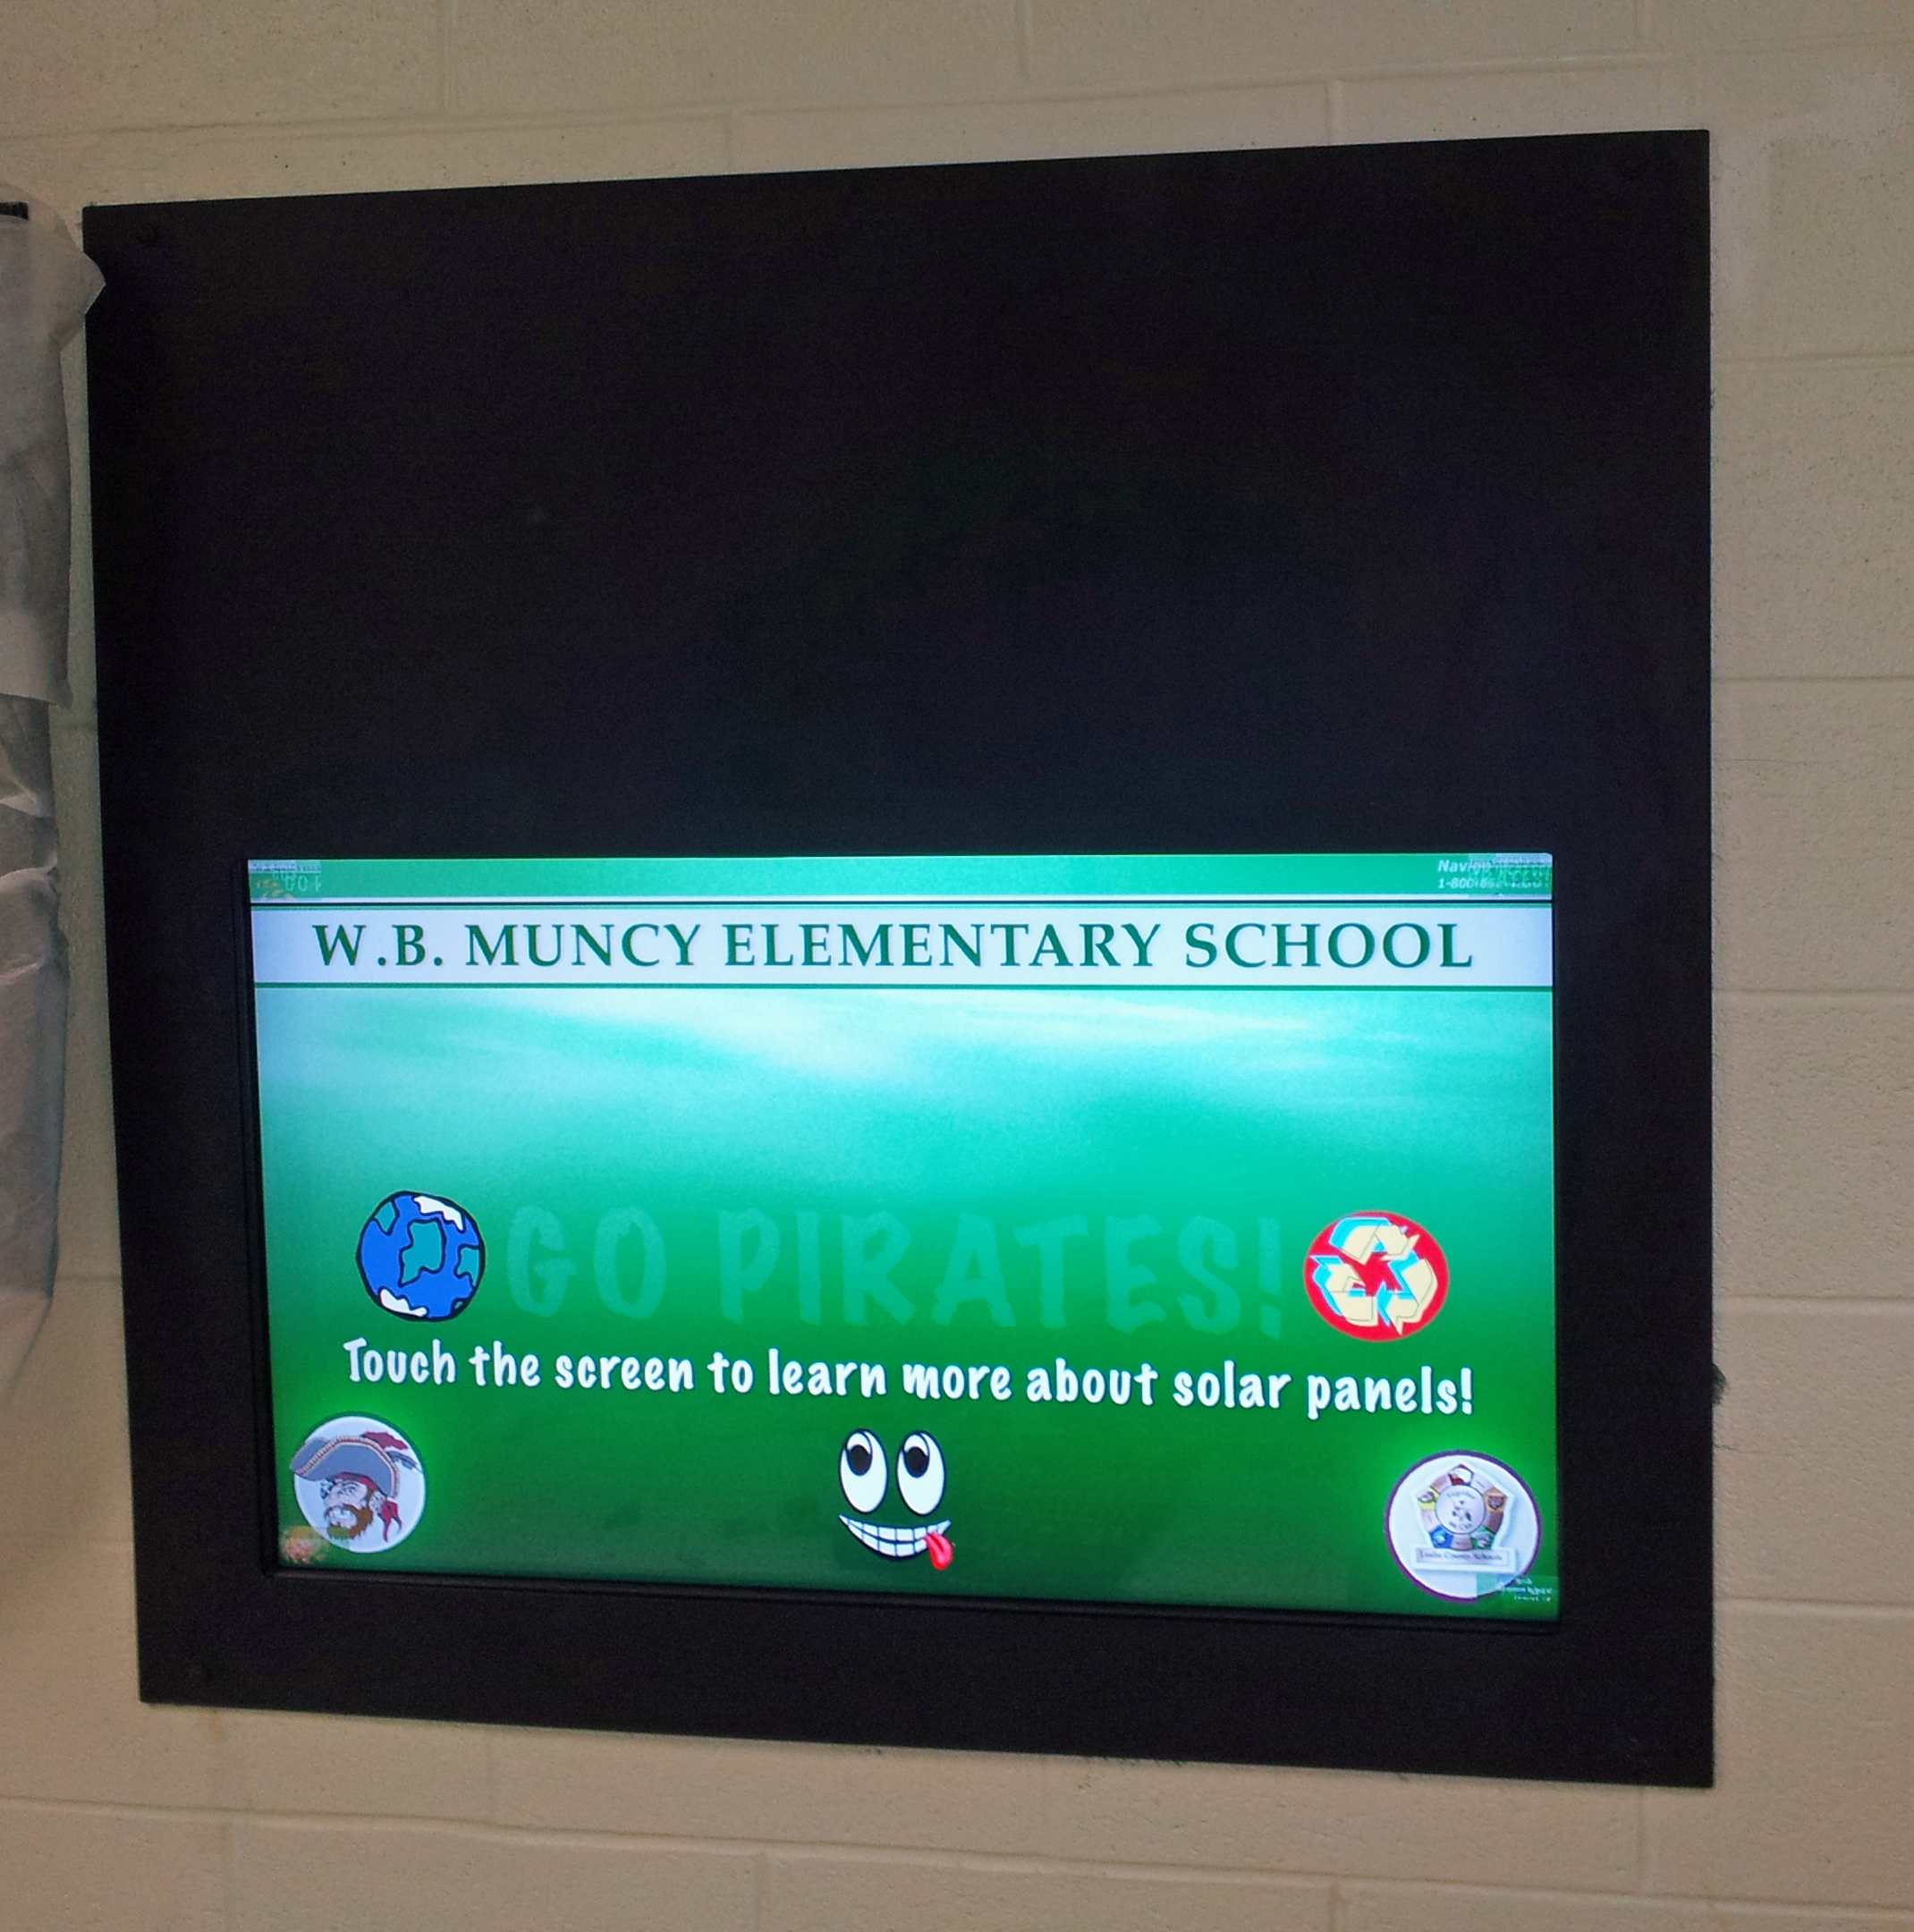 Students, faculty, parents & visitors can monitor energy use at the school